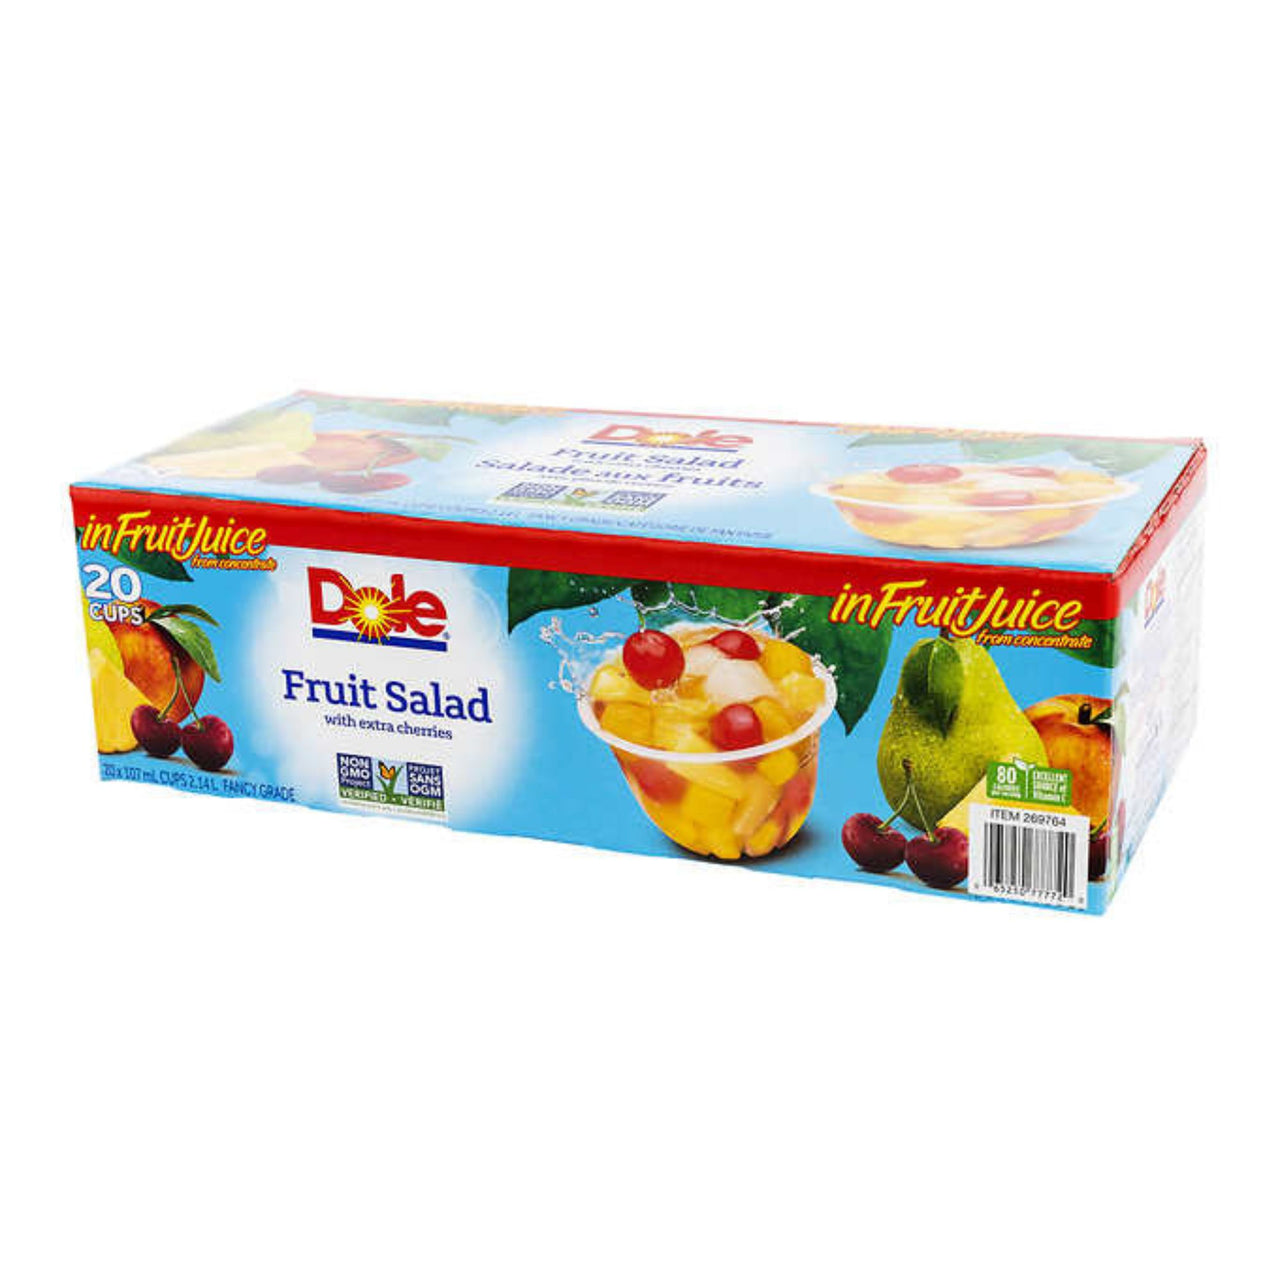 Image of Dole Fruit Salad with Extra Cherries Cups 20-Pack